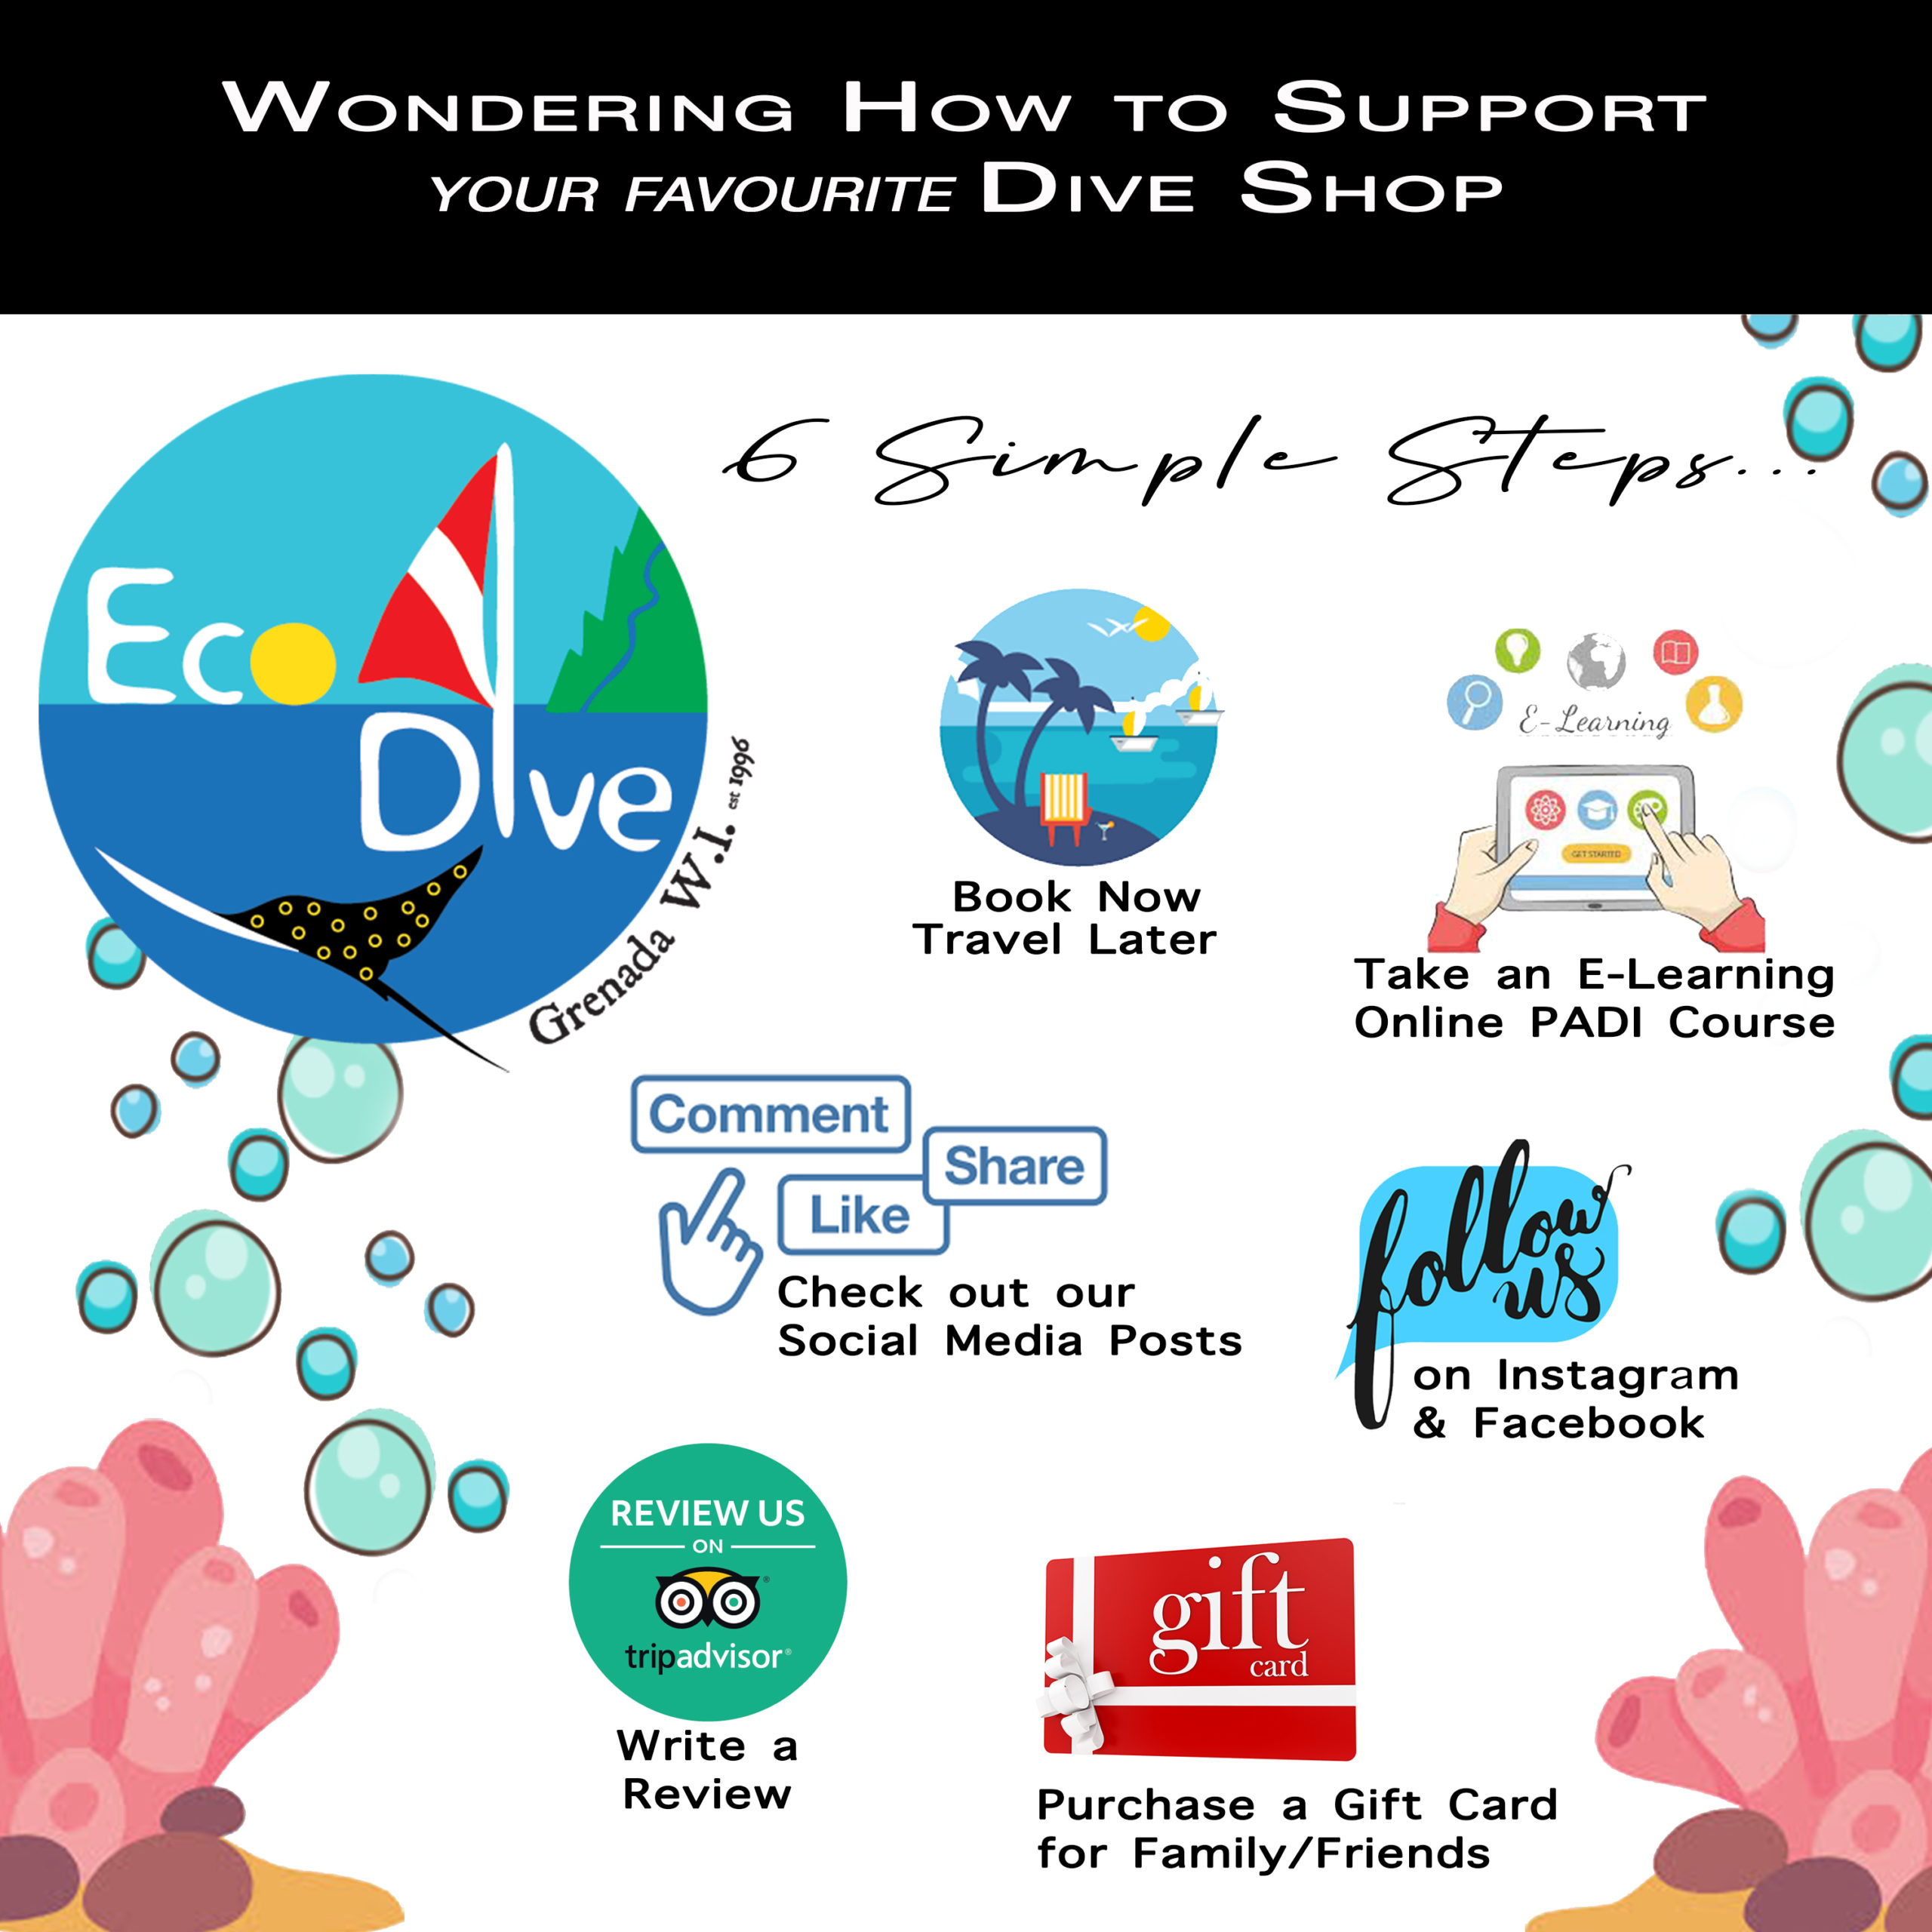 Wondering how you could support your favourite dive shop?